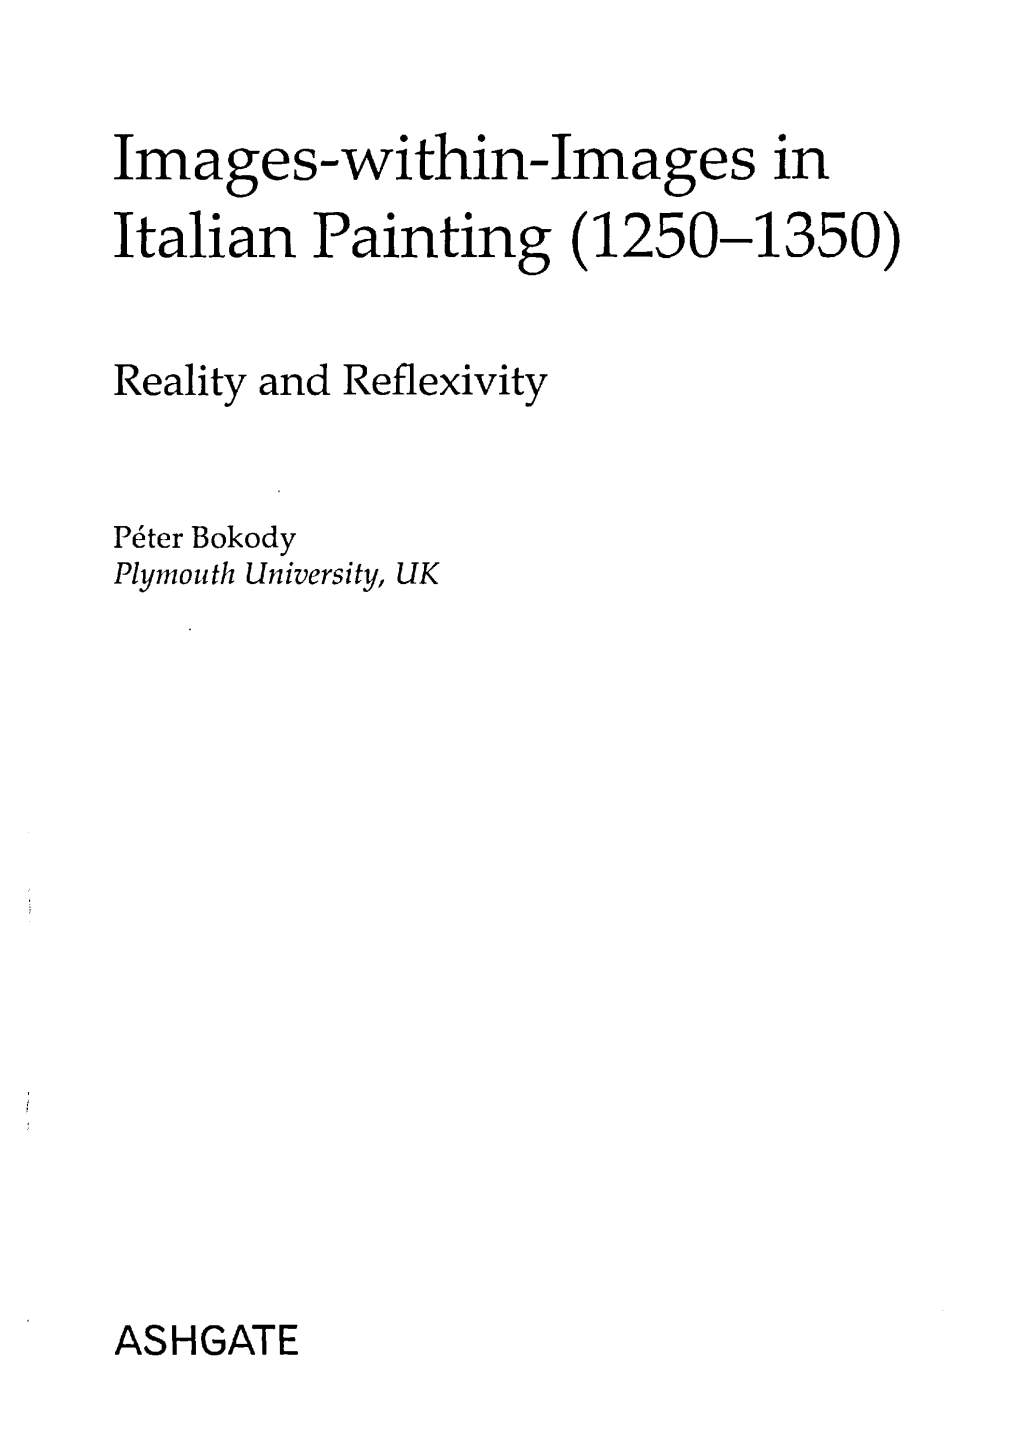 Images-Within-Images in Italian Painting (1250-1350)